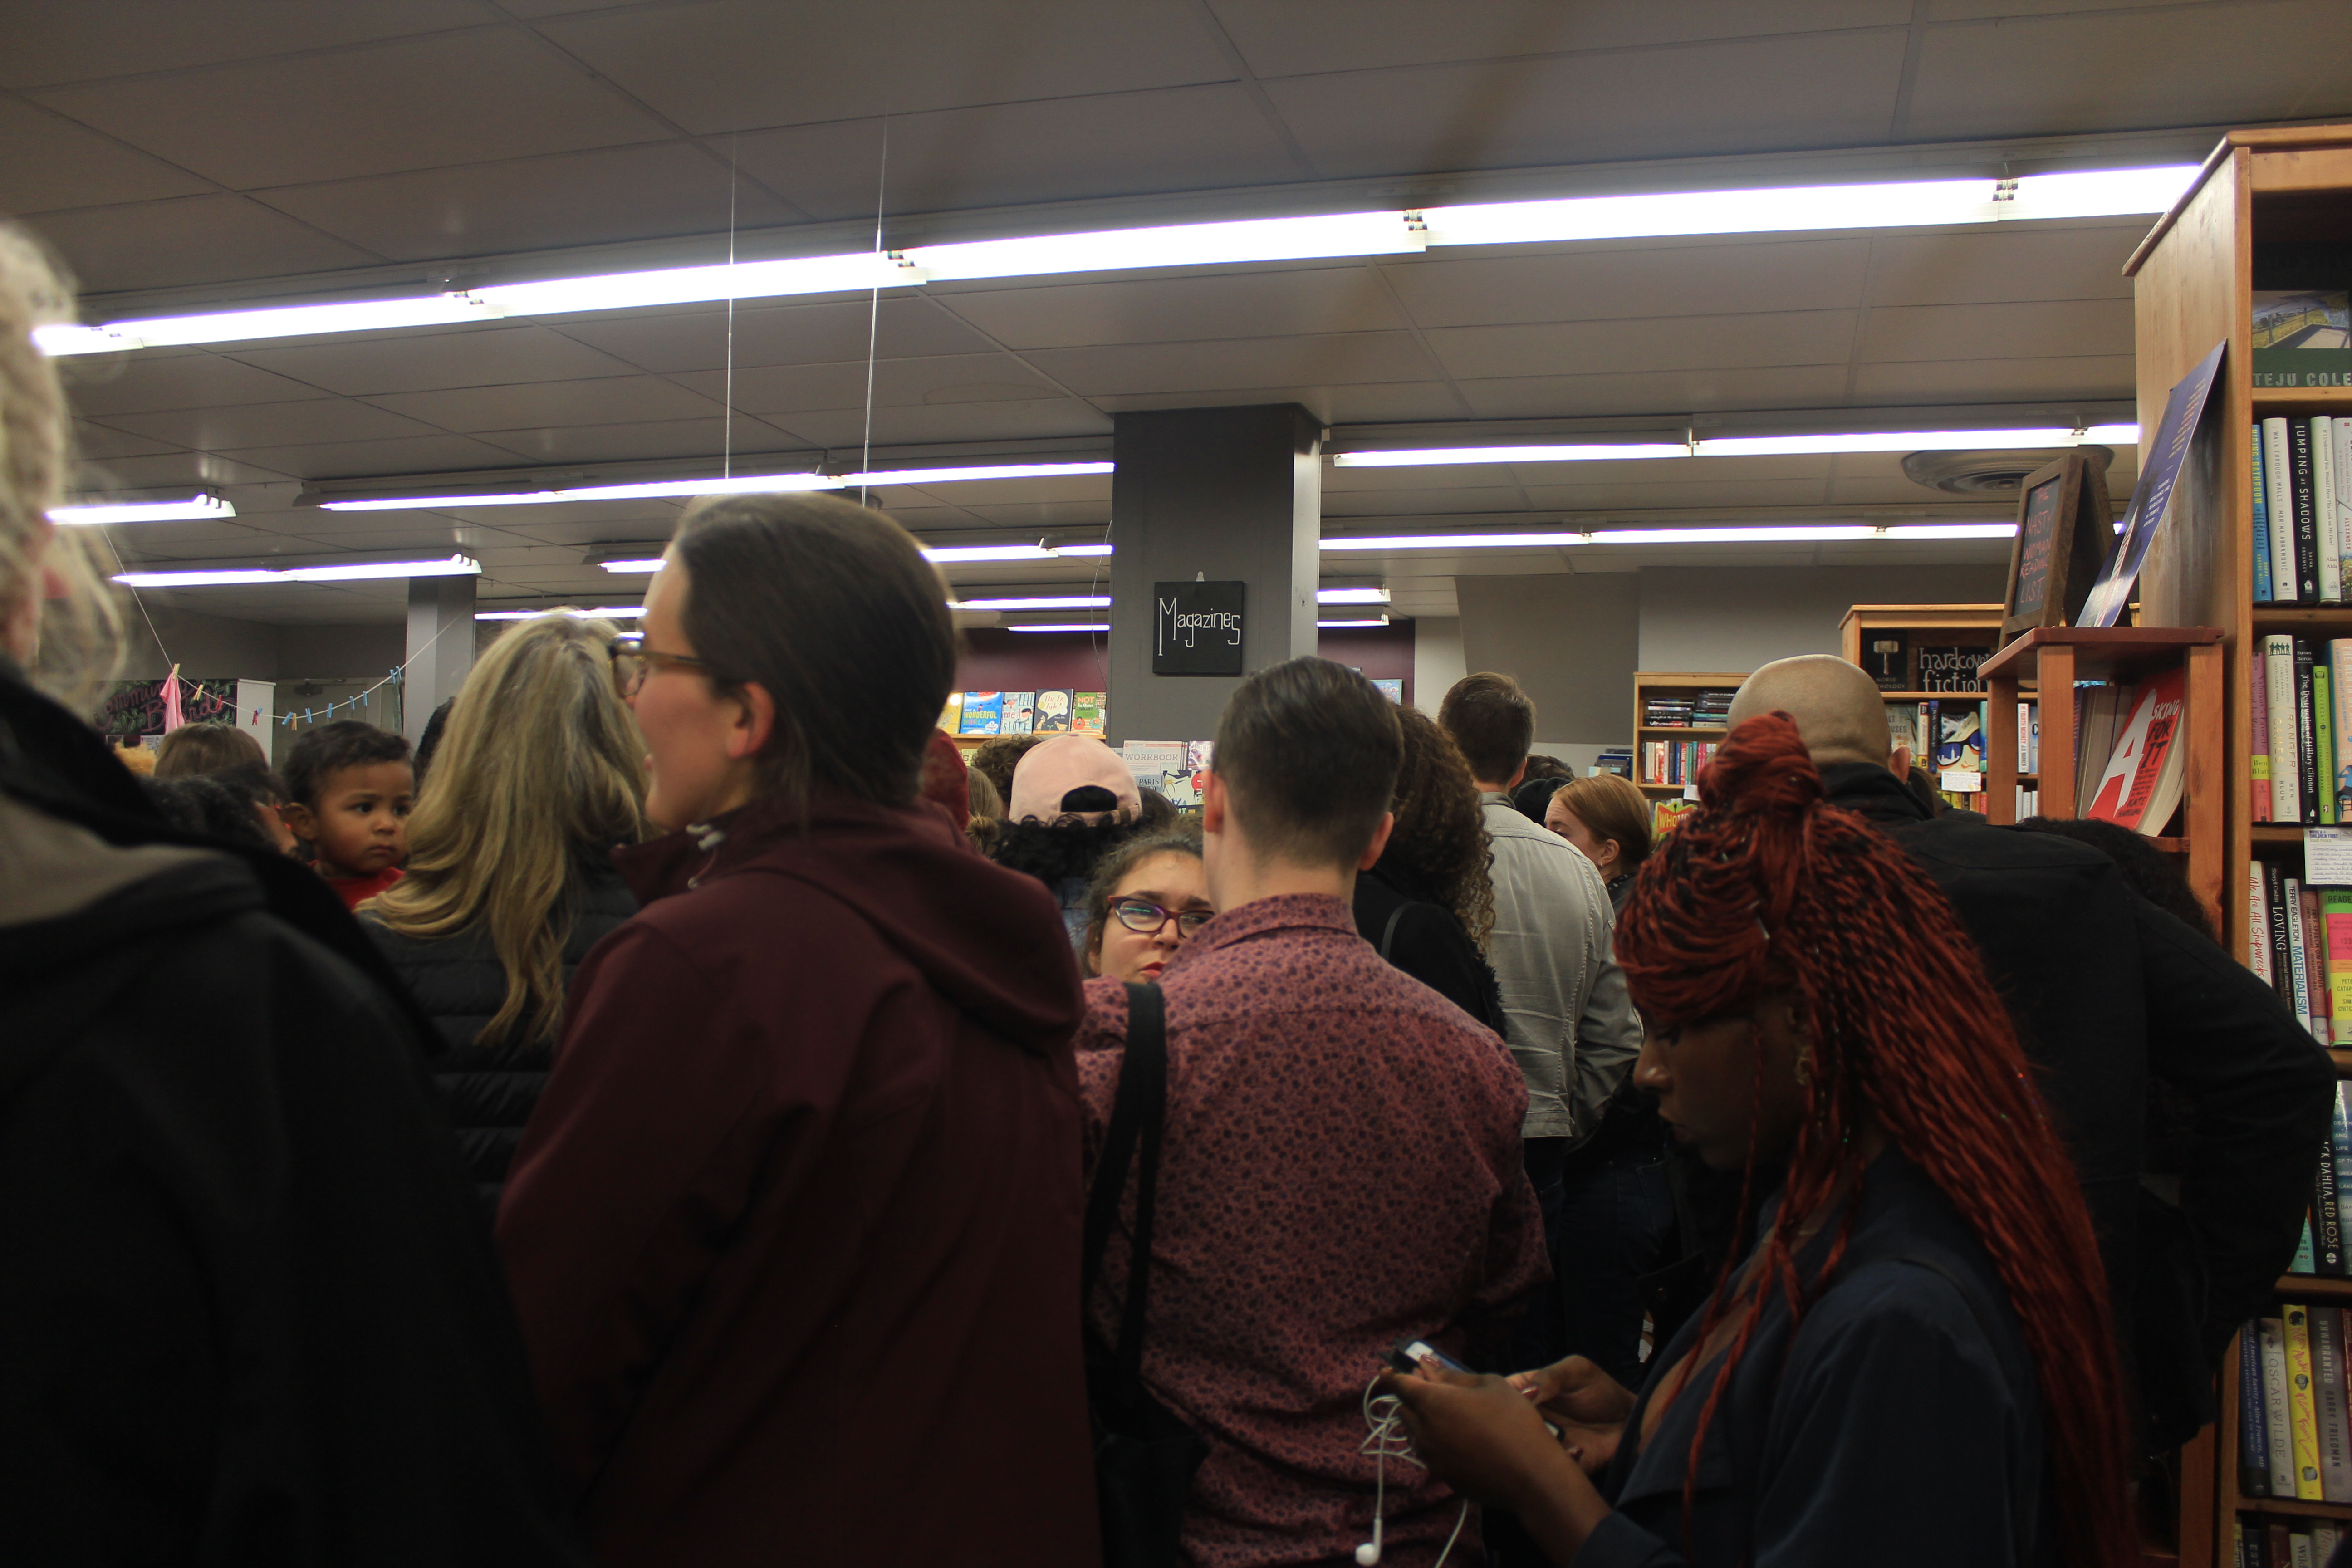 Poetry listeners cram into Women & Children First bookstore for a poetry reading by Eve Ewing and Denez Smith on Nov. 4, 2017. (Meredith Melland, 14 East)